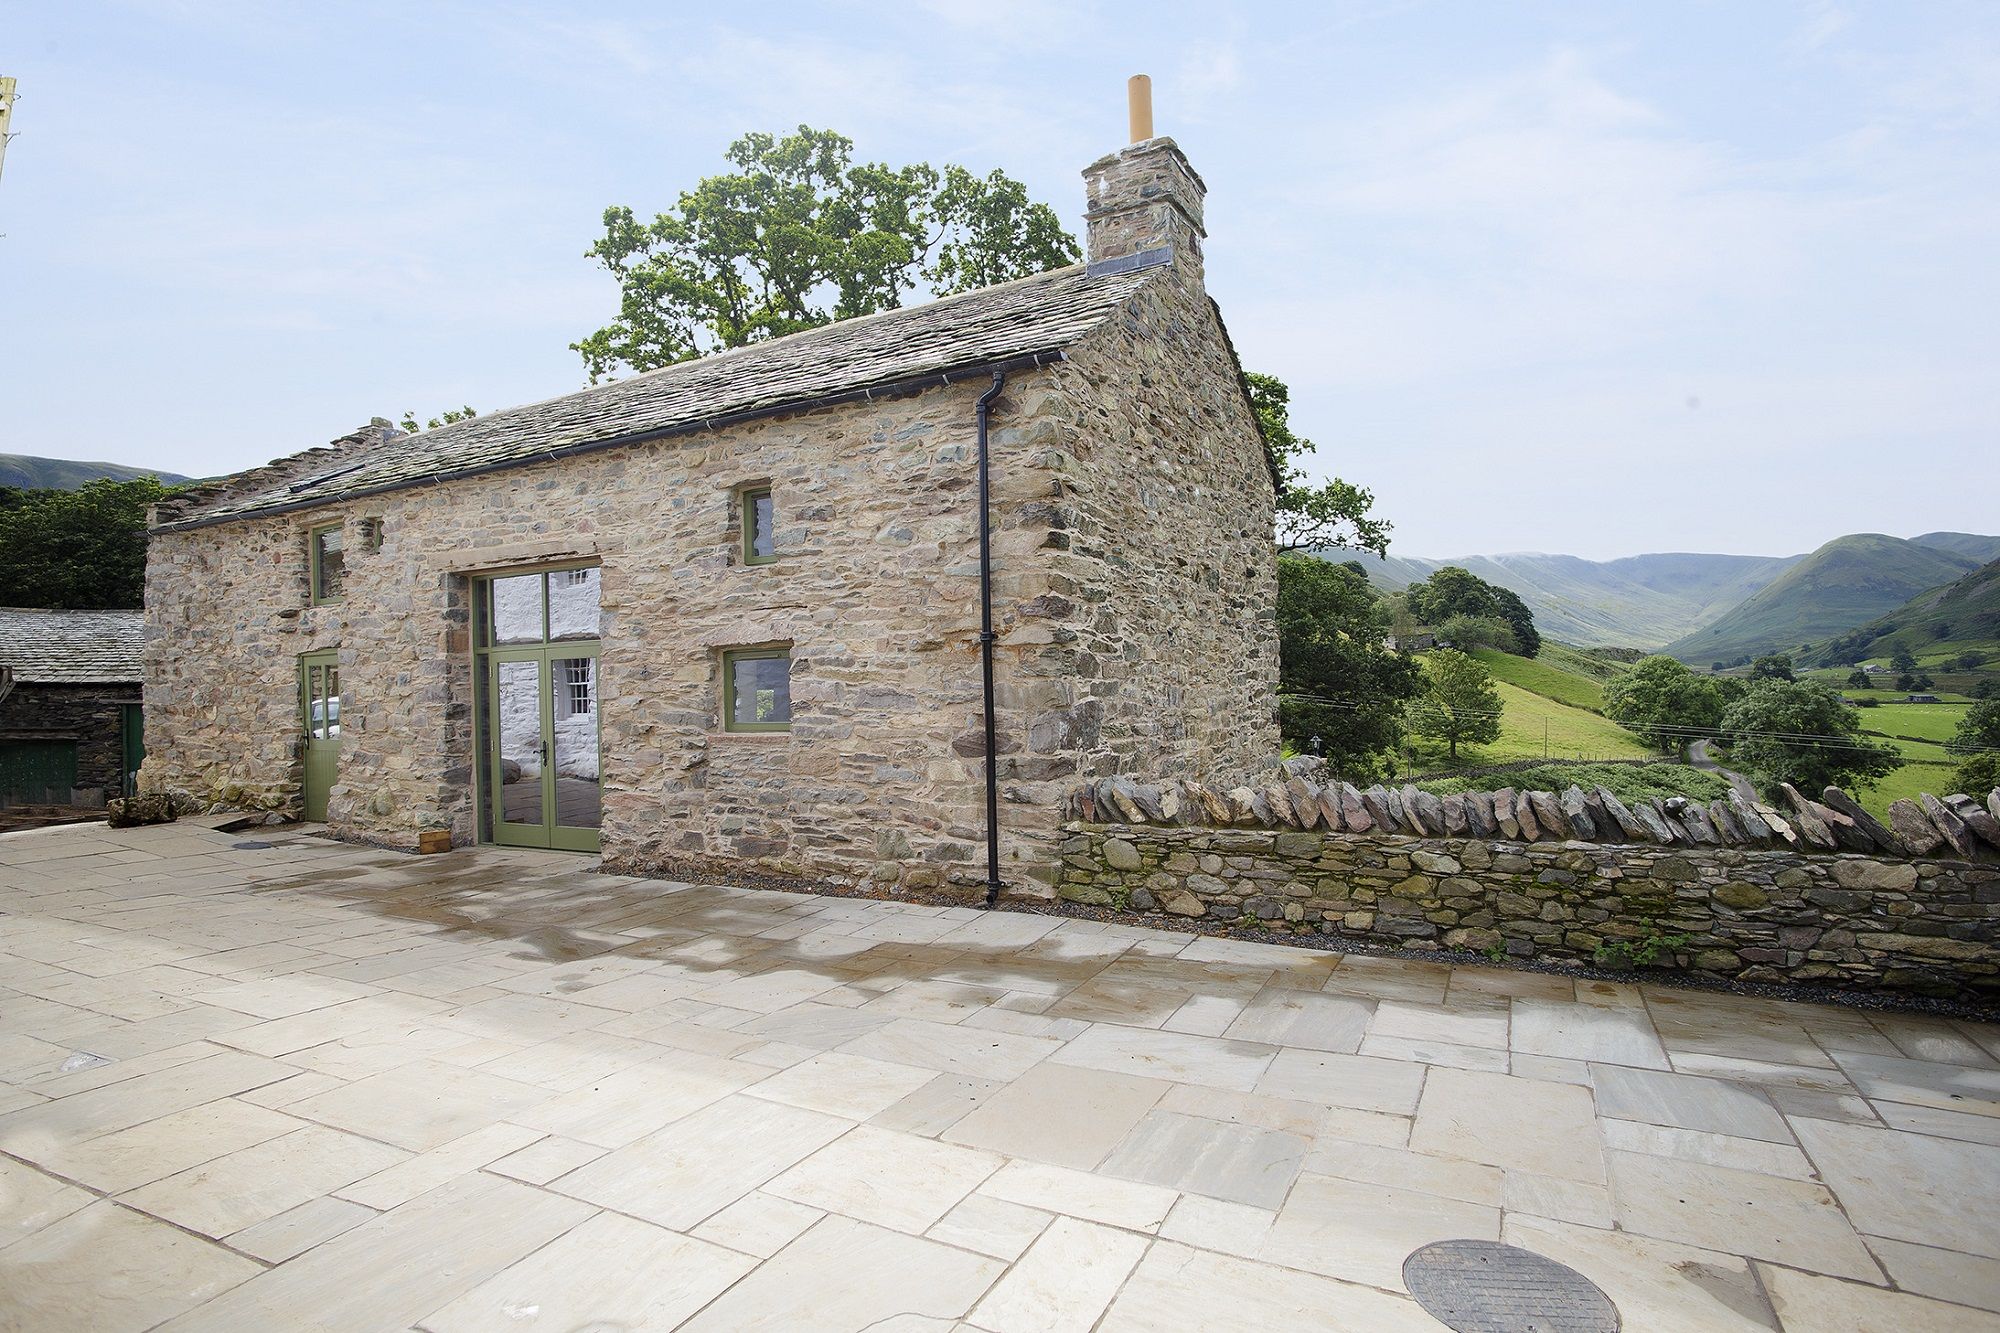 Sandstone terrace and Cruik Barn at Hause Hall Farm two ensuite bedrooms in detached cottage